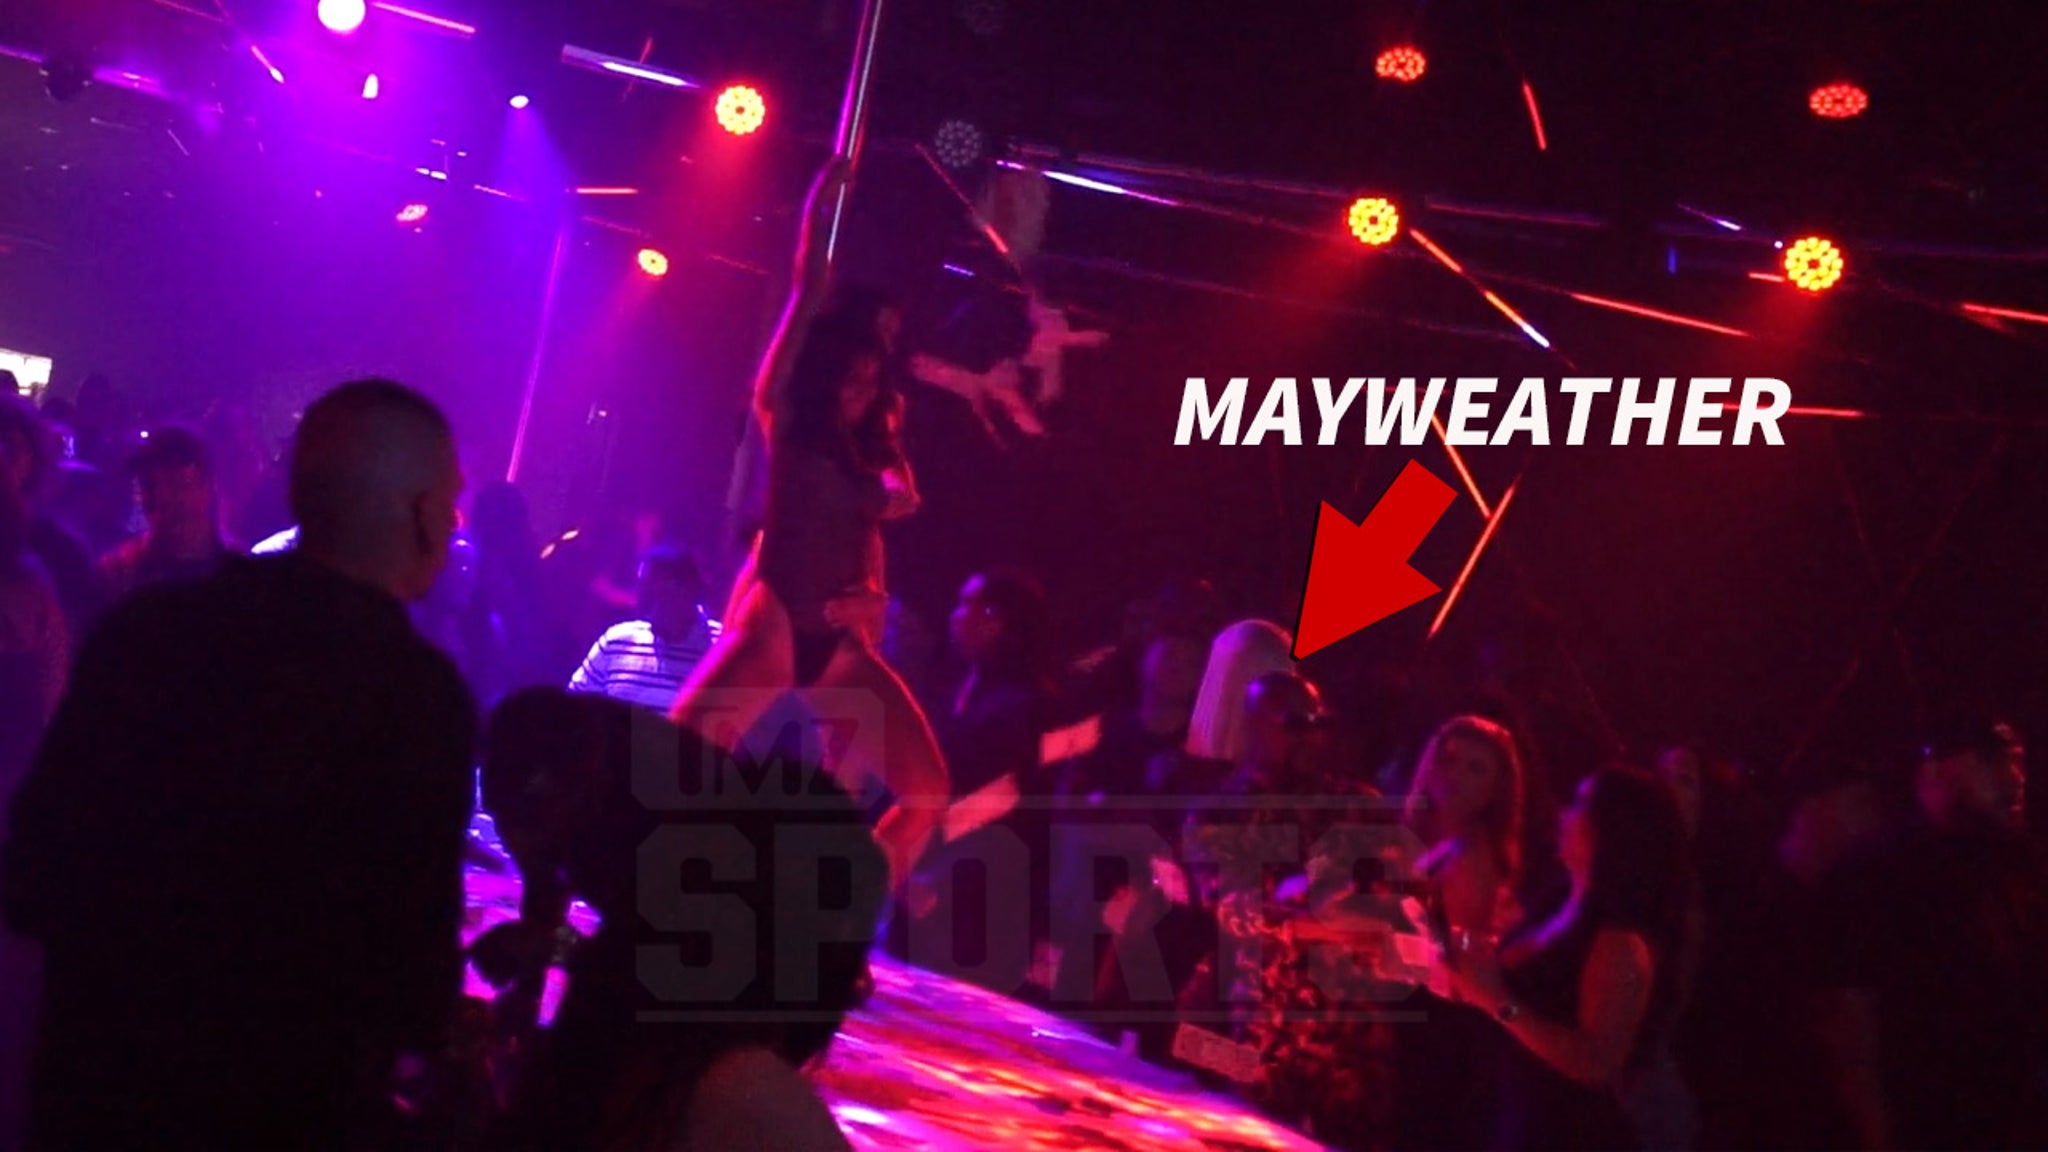 Floyd Mayweather Throws $50k From His Backpack at Strip Club.